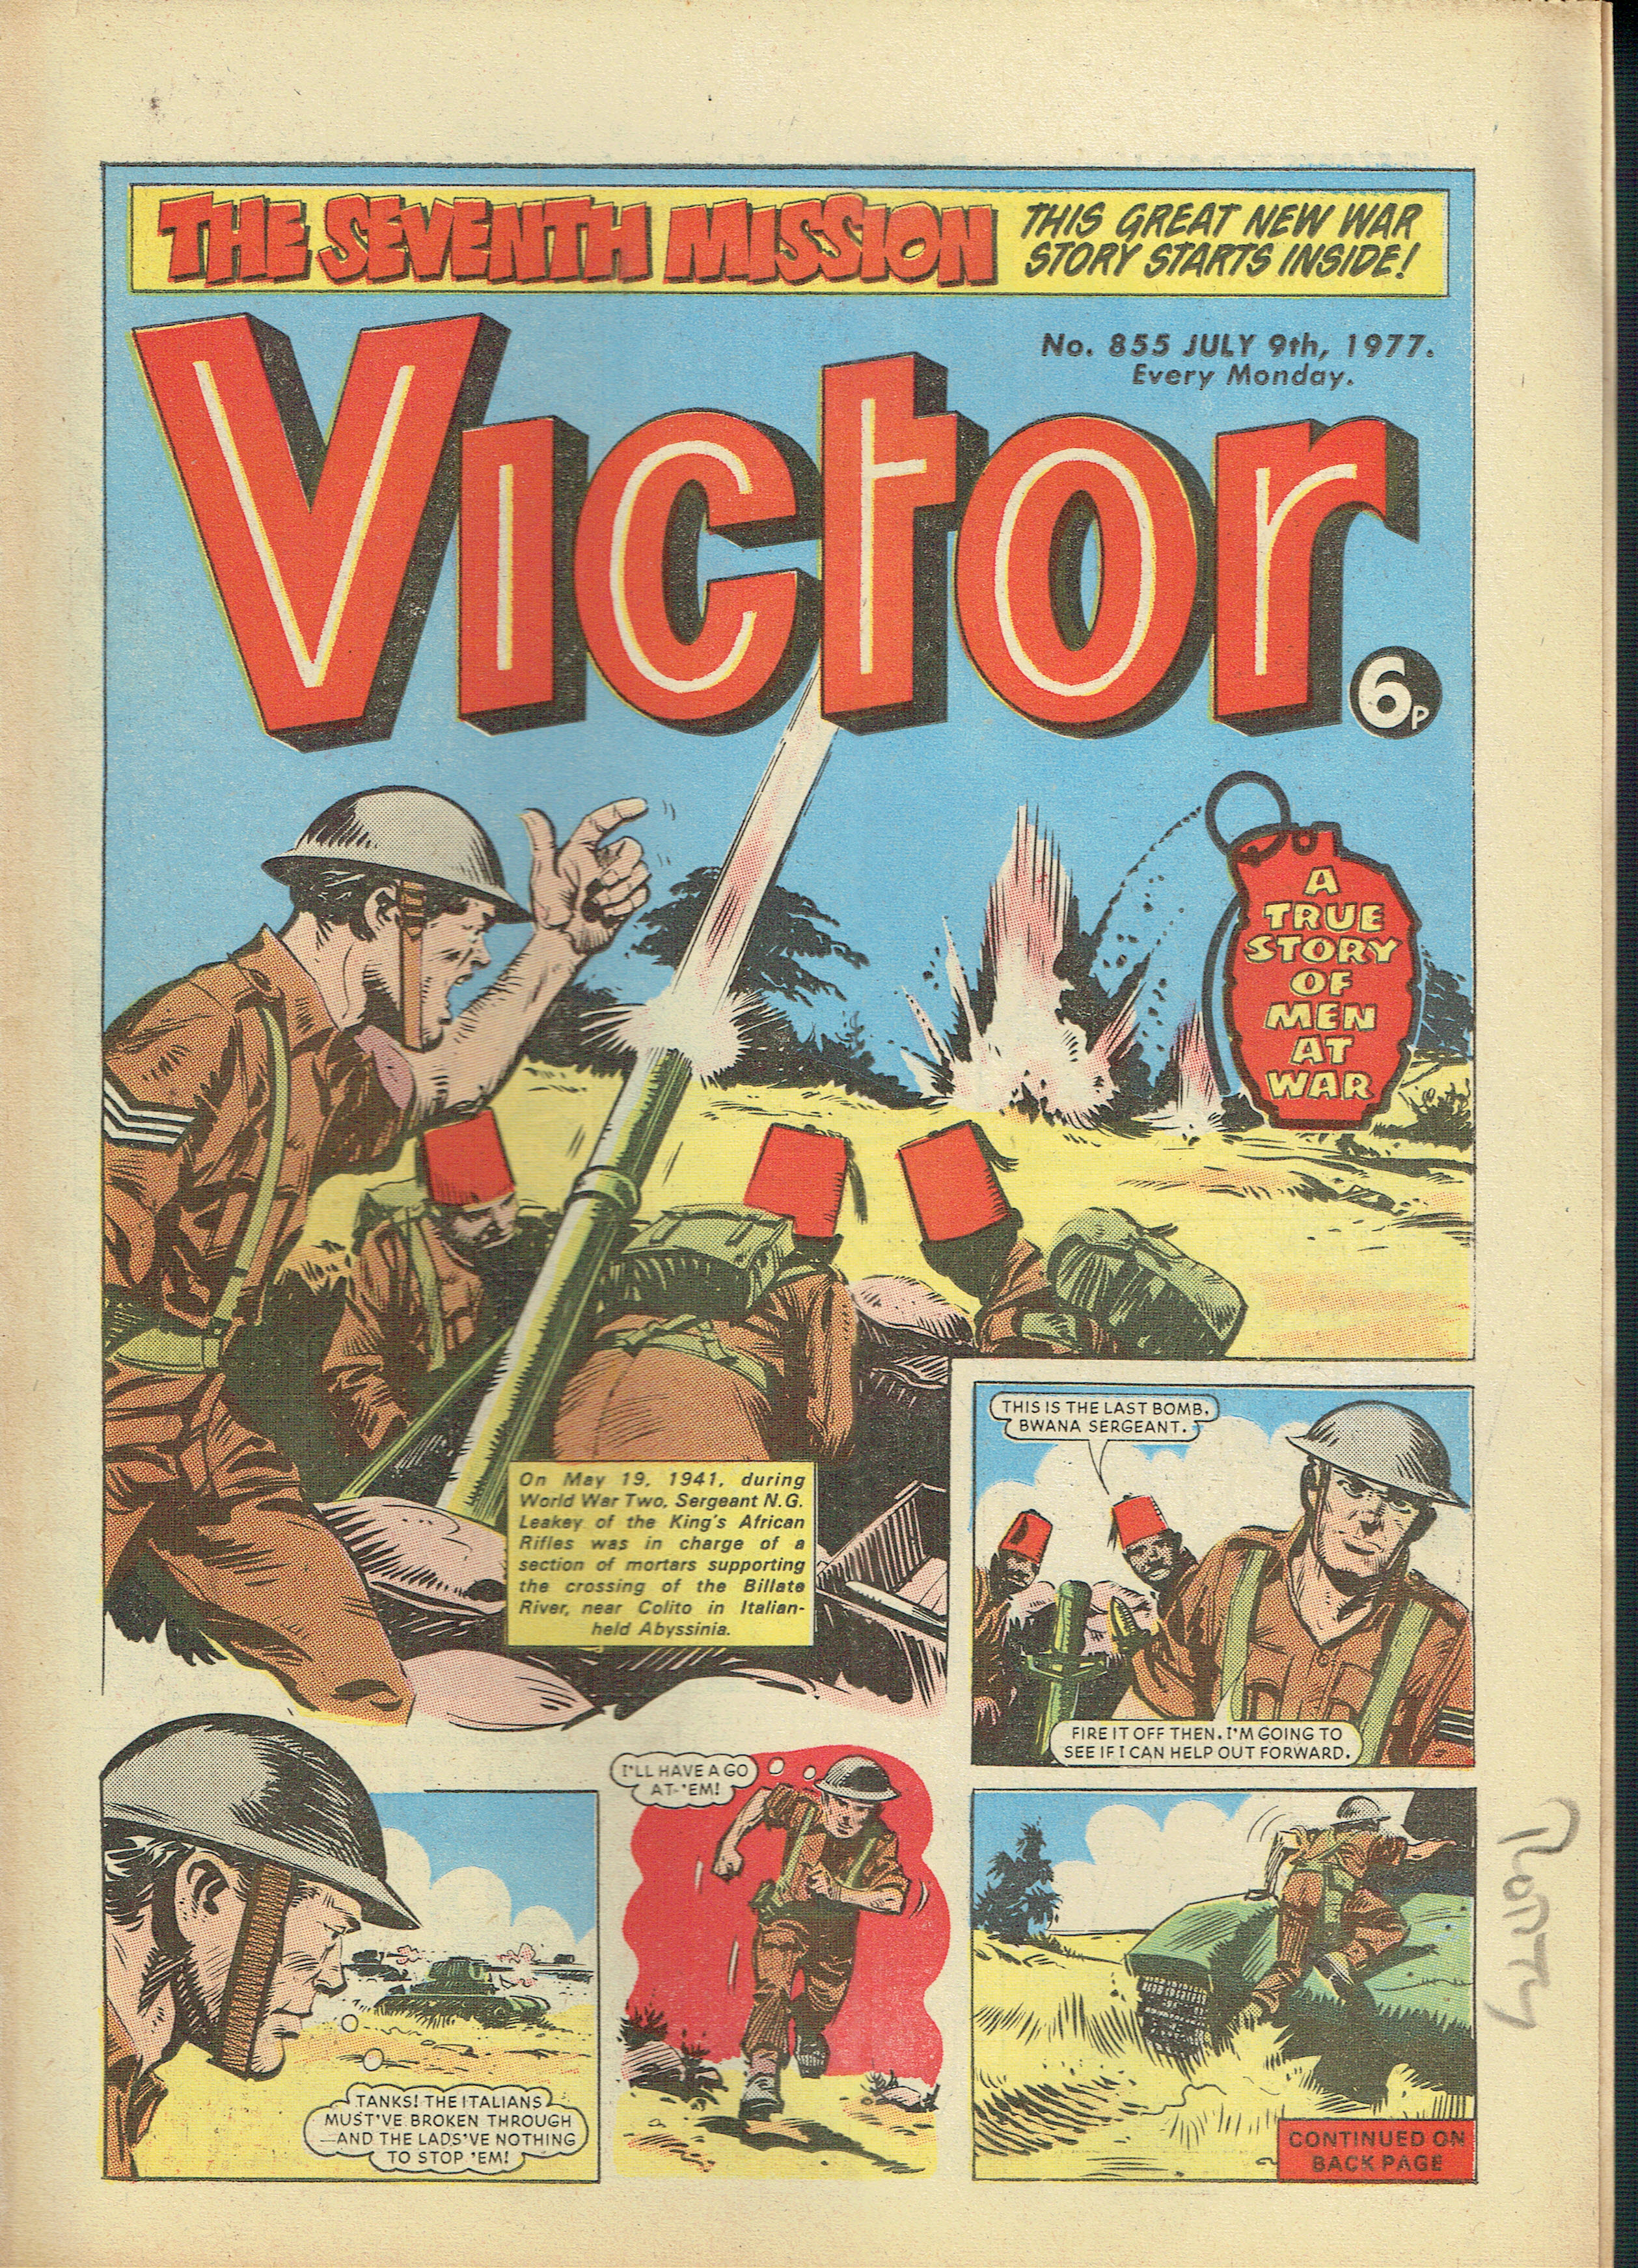 VICTOR UK COMIC NO 855 JULY 9TH 1977 Vintage and Modern Magazines ...